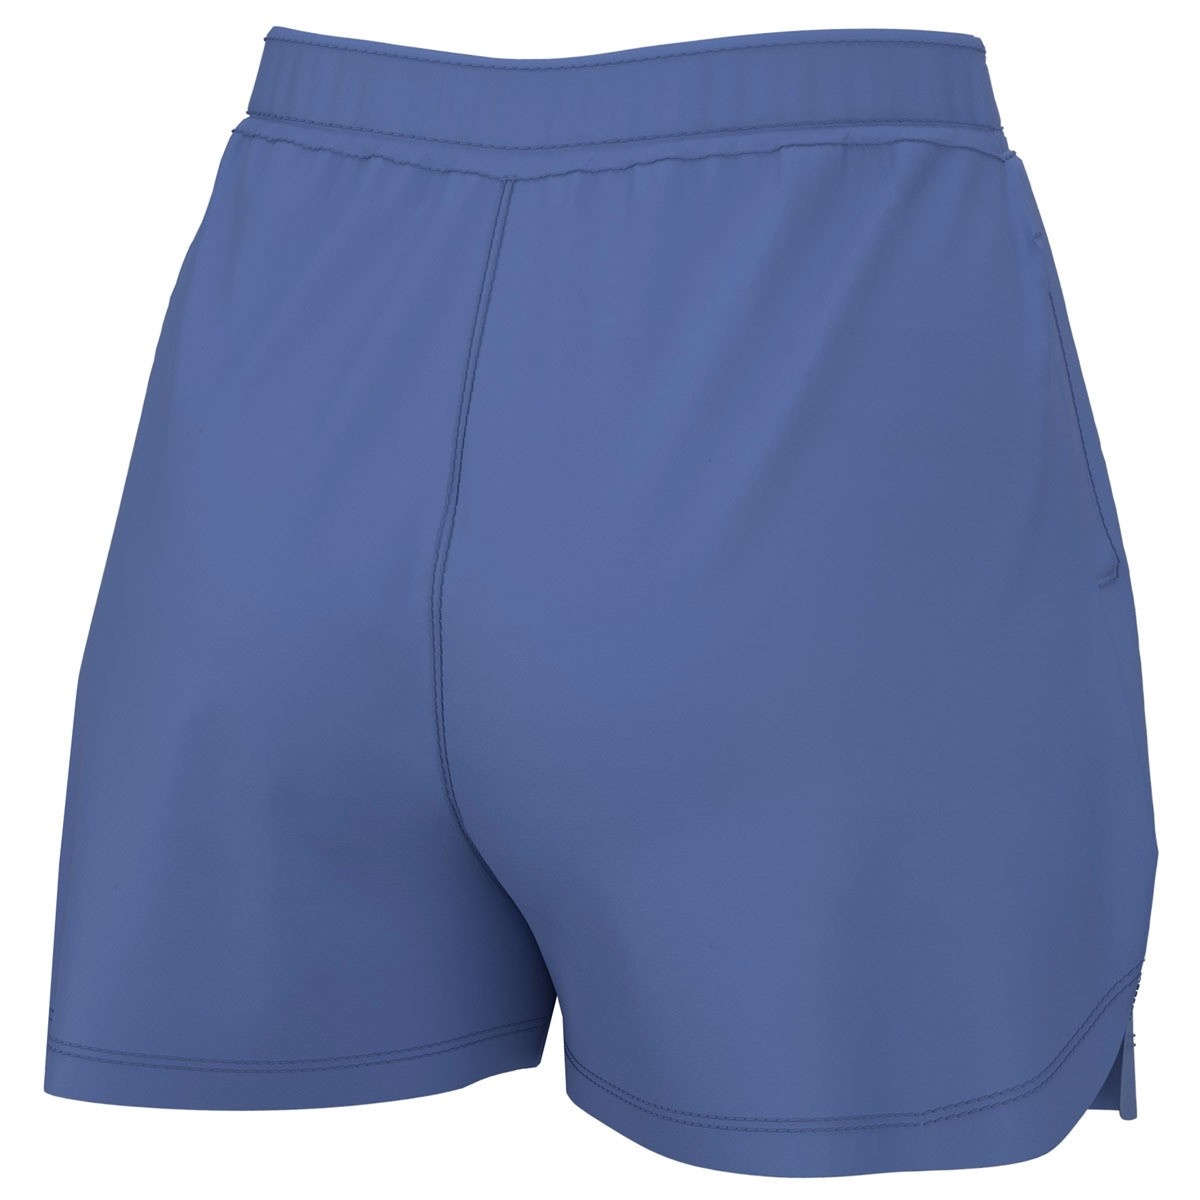 HUK Pursuit Solid Volley Short, Wedgewood